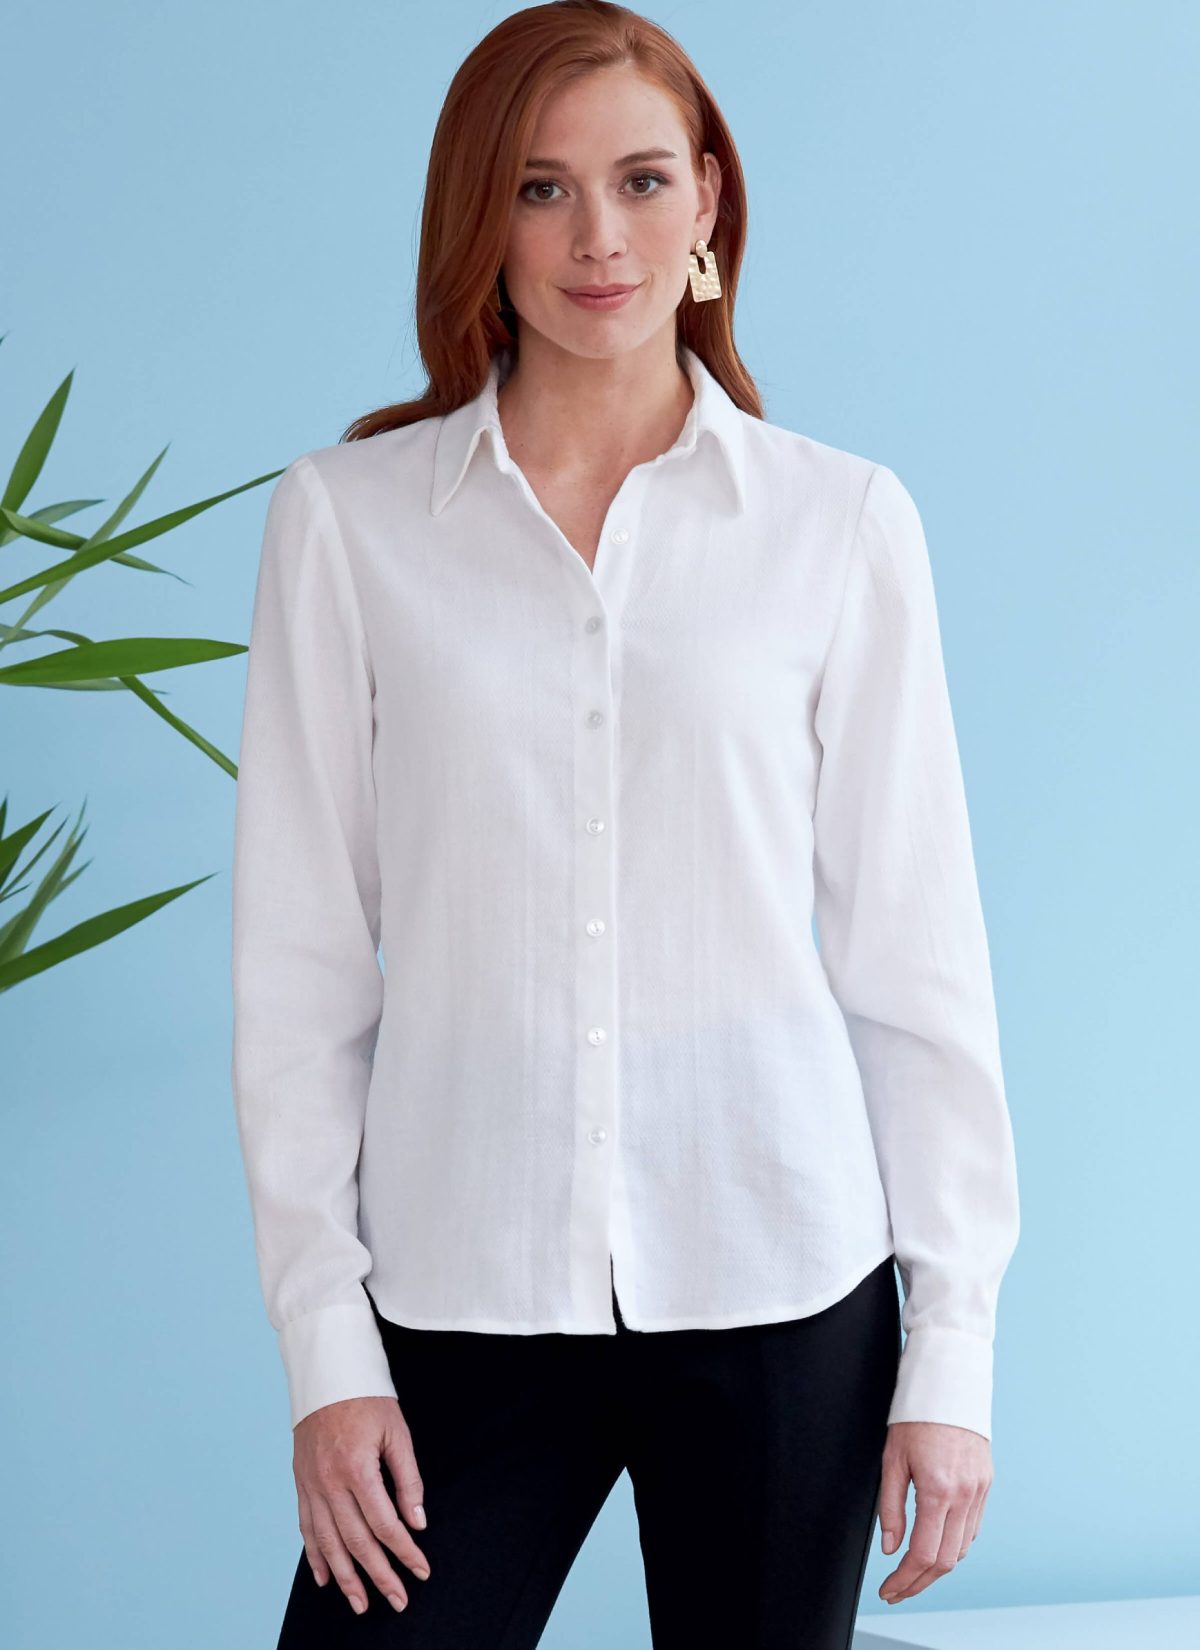 Butterick Sewing Pattern B6747 Misses' Button-Down Collared Shirts